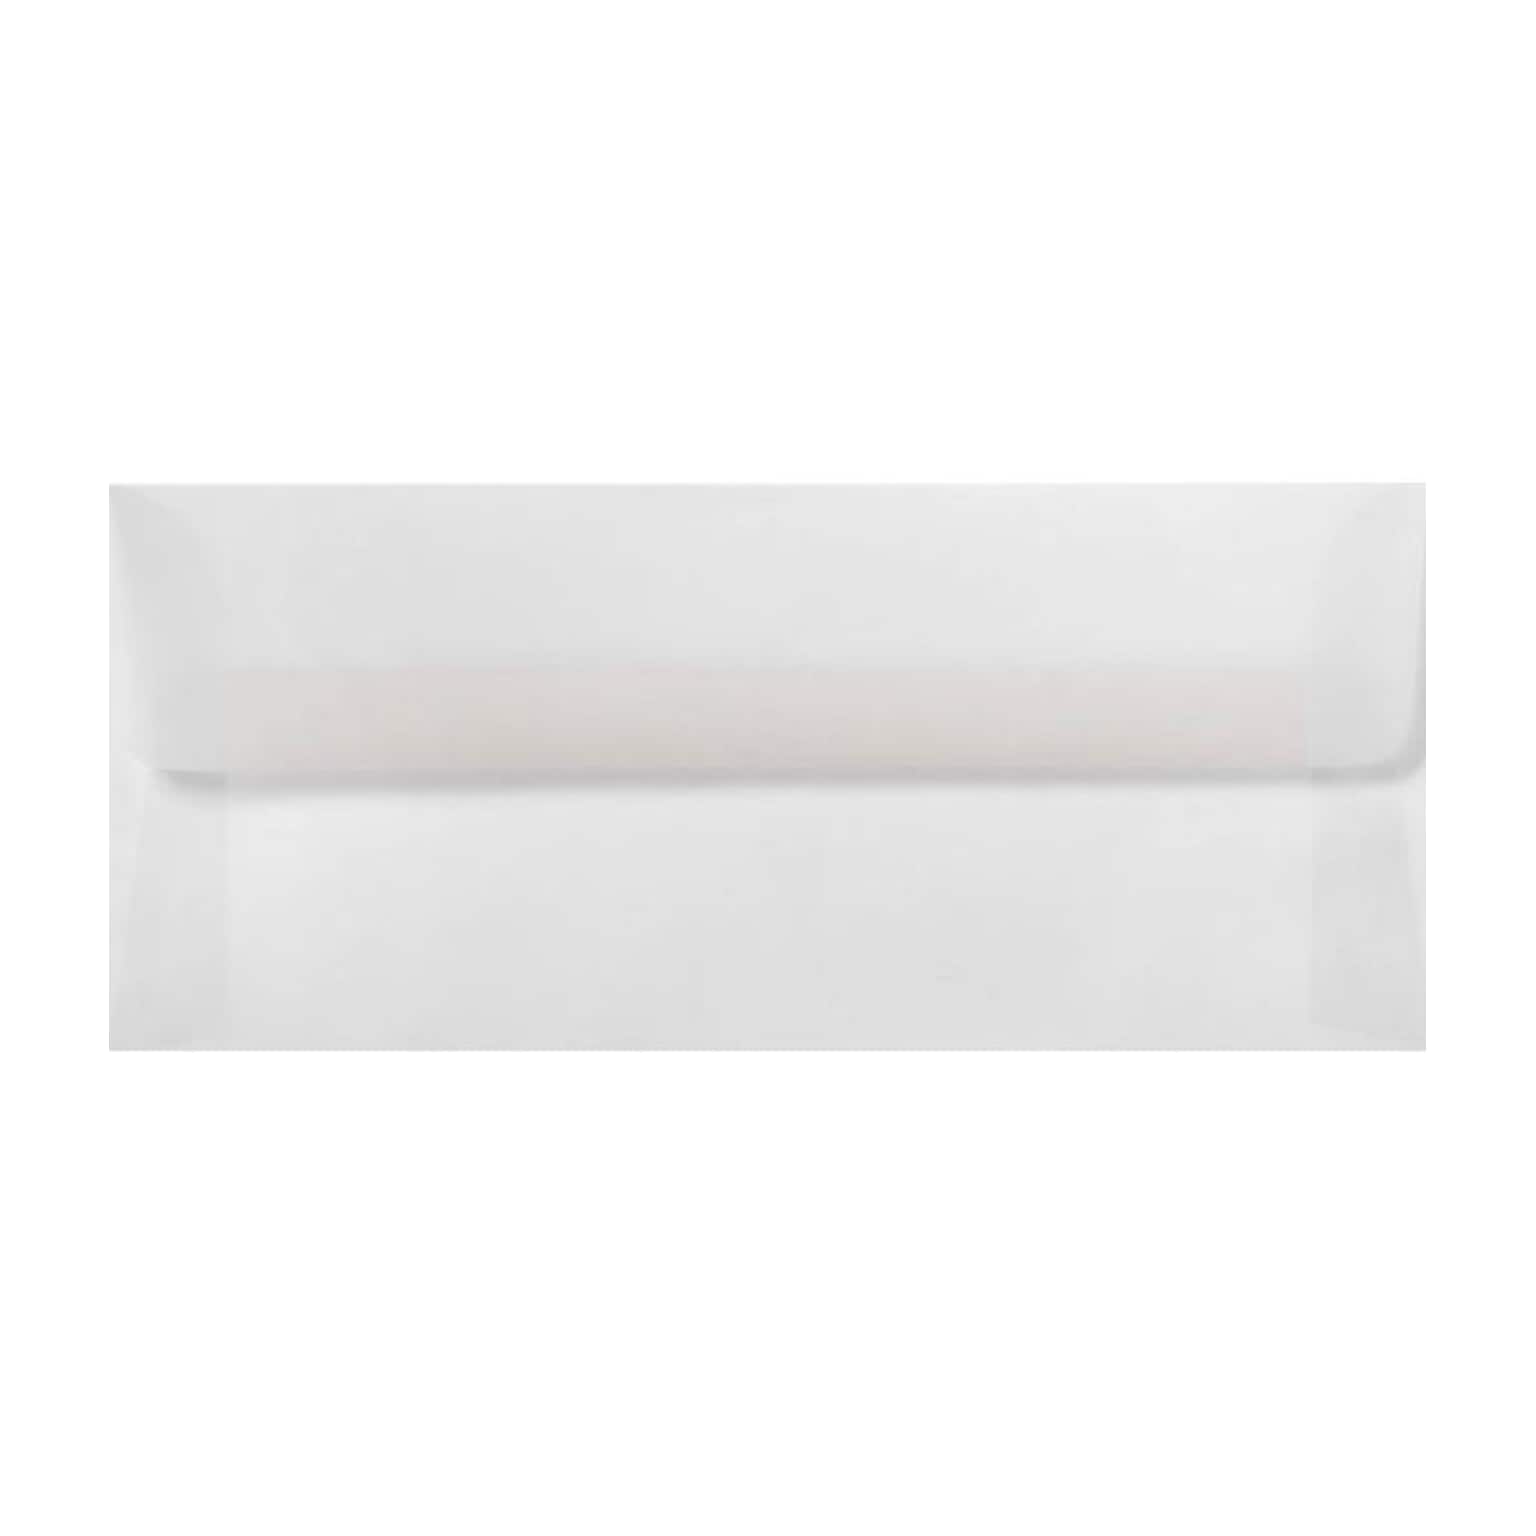 LUX Square Flap Self Seal #10 Business Envelope, 4 1/2 x 9 1/2, Clear Translucent, 1000/Box (4860-00-1000)